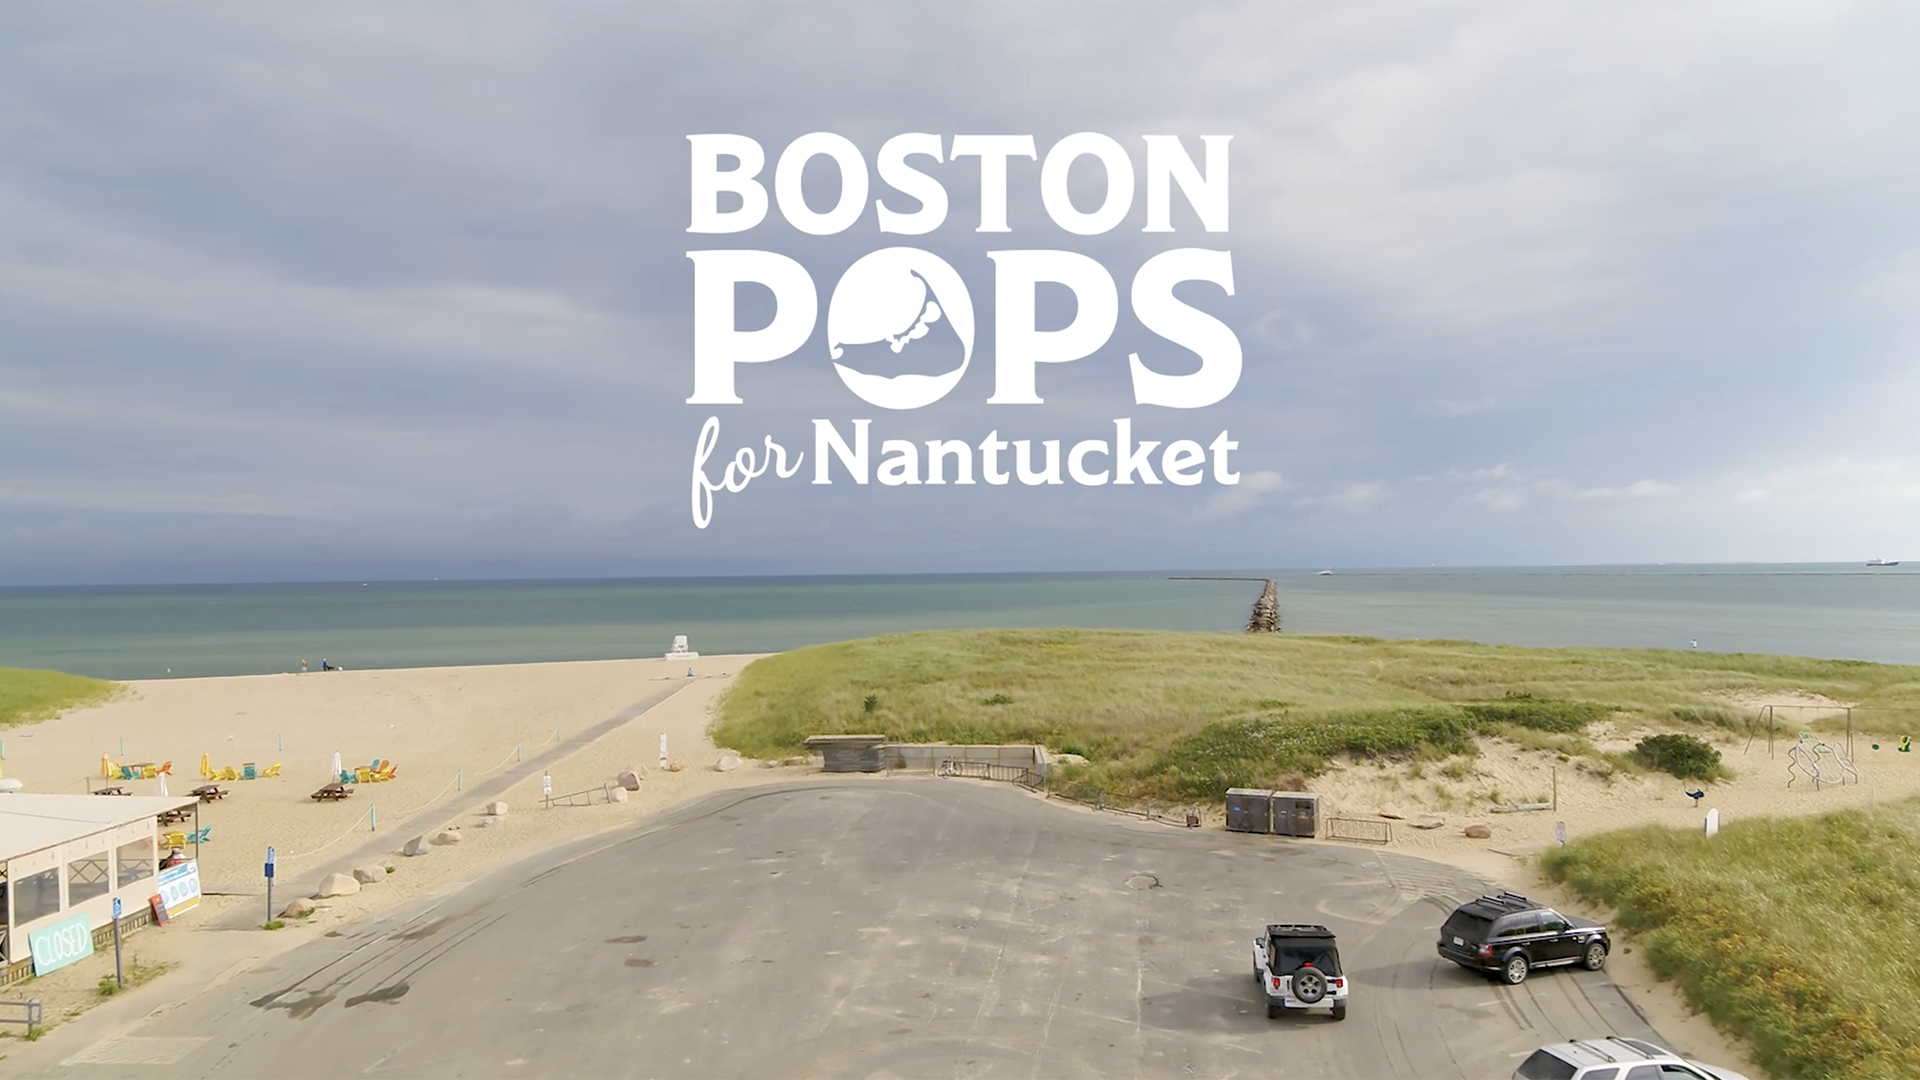 boston pops for nantucket in white letters on top of a photos of the ocean, parking lot with three cars